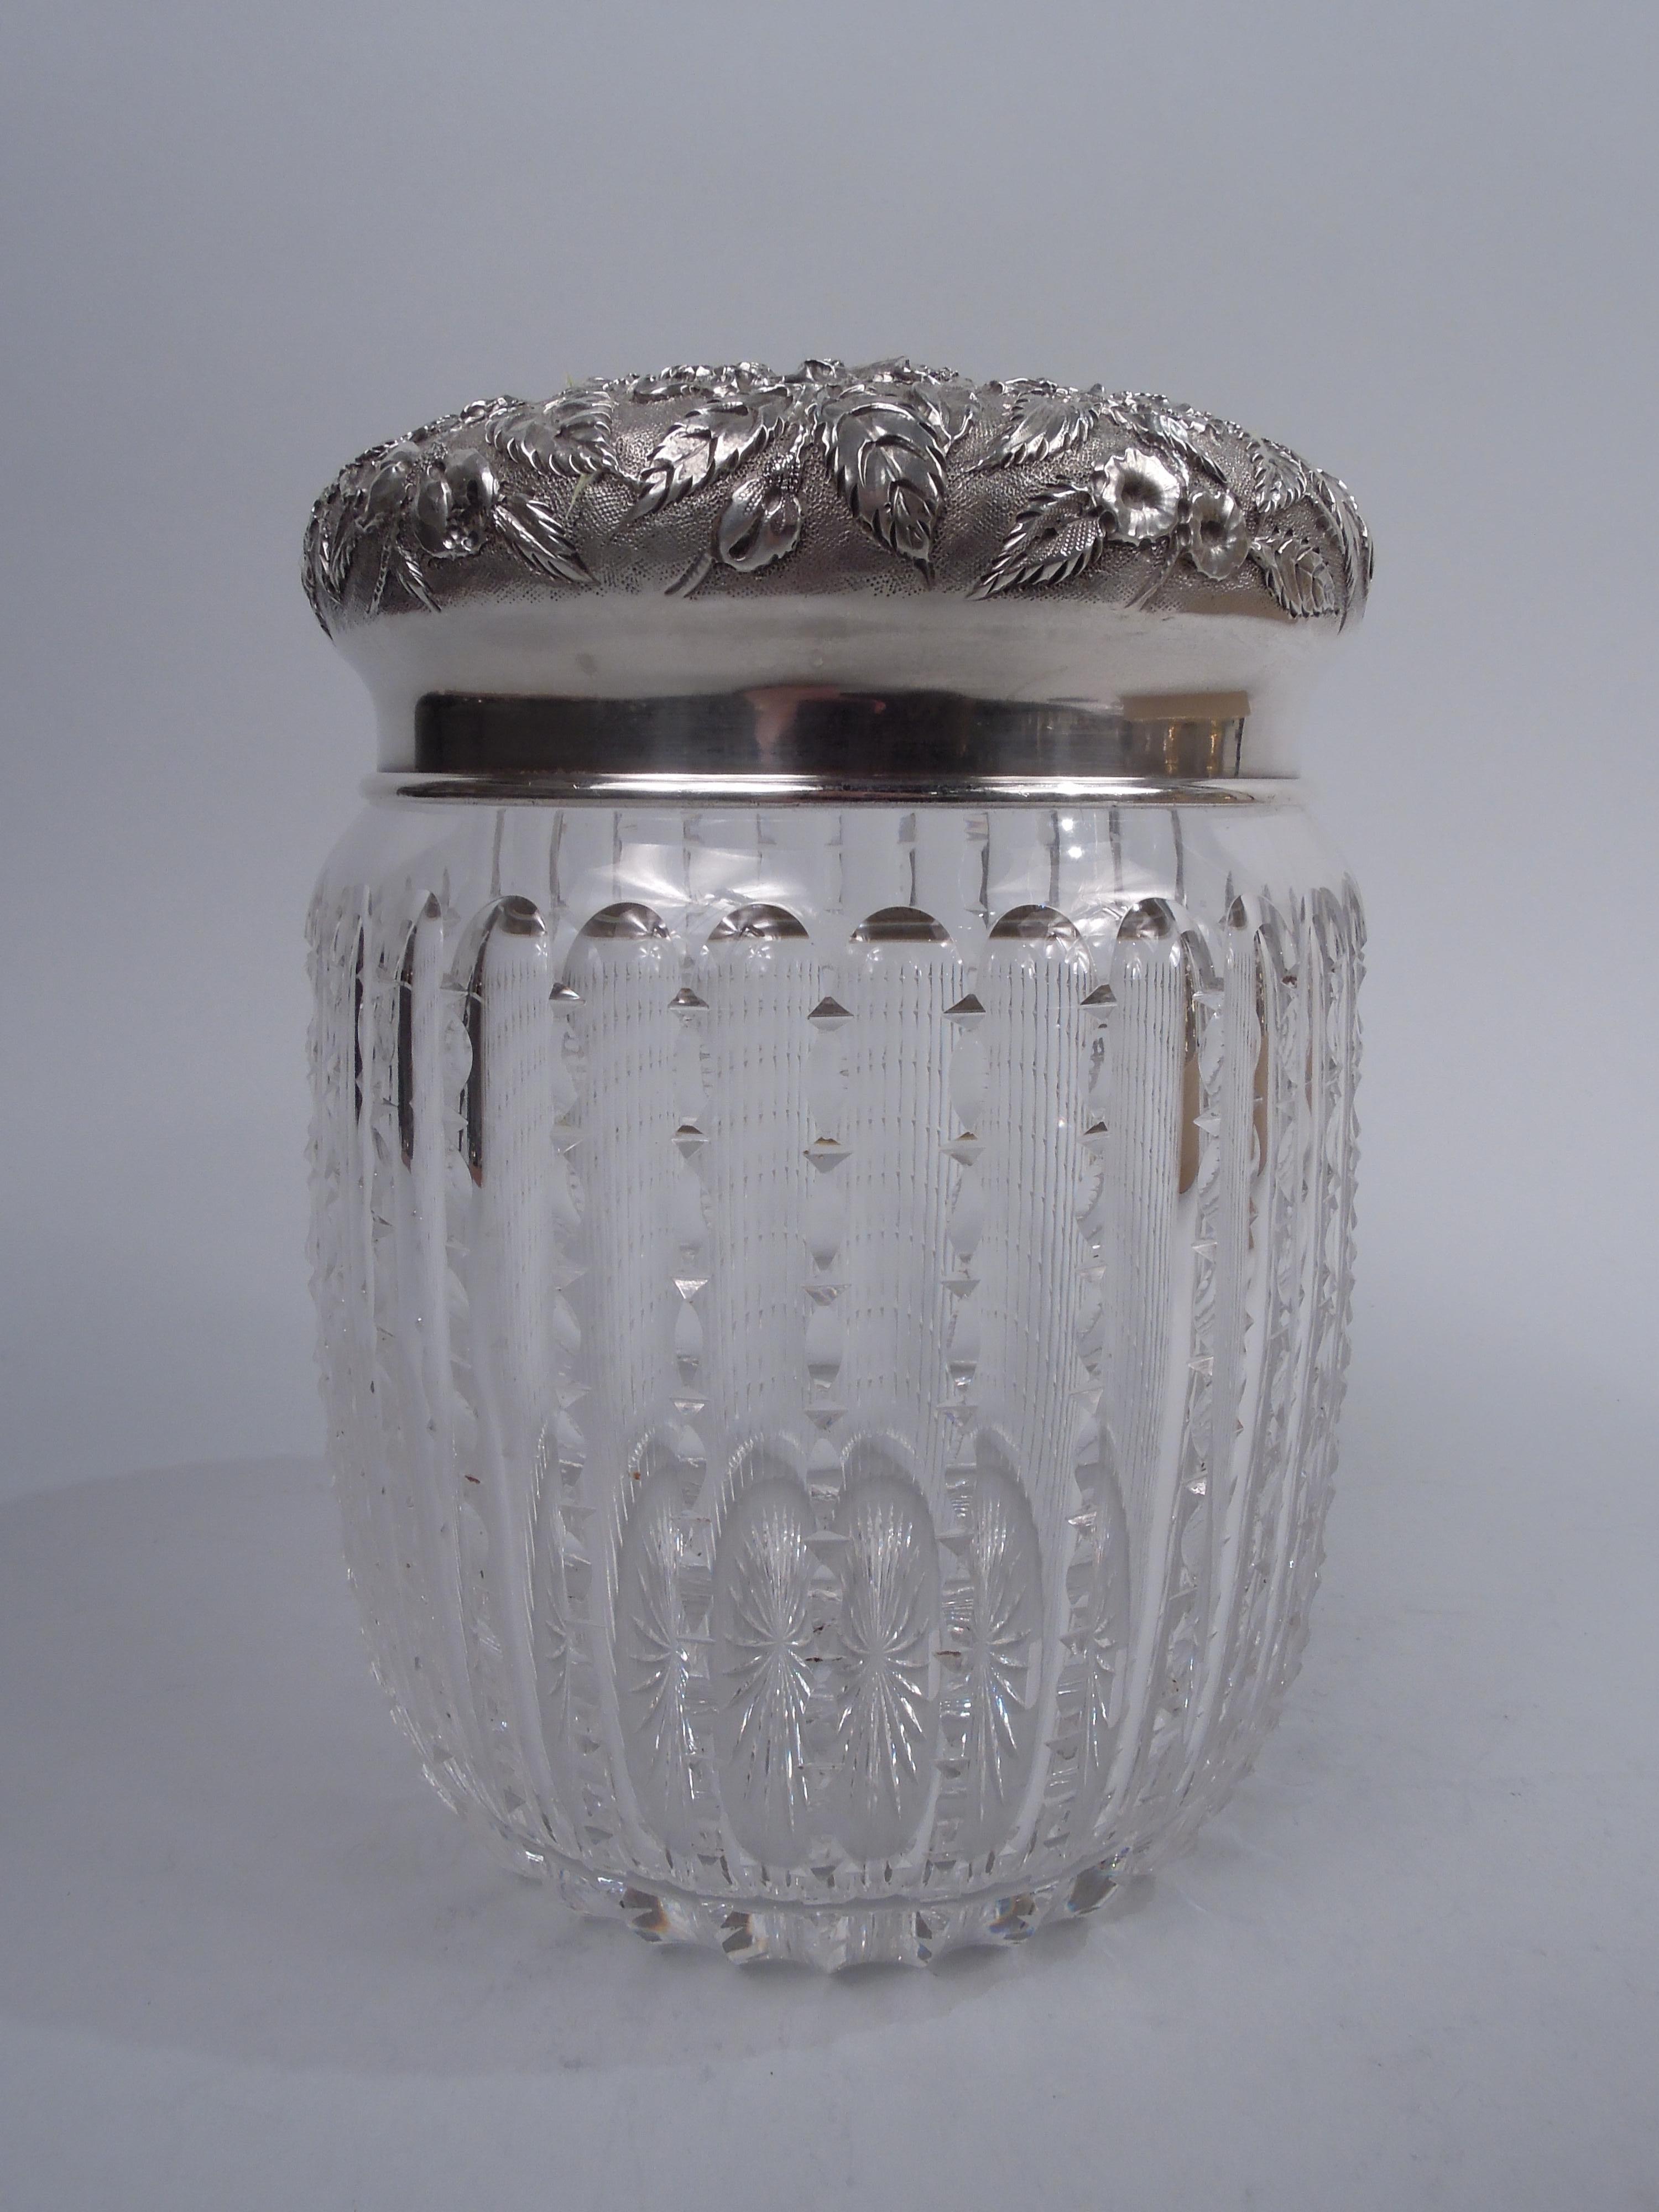 Edwardian glass tobacco jar with sterling silver cover. Made by S. Kirk & Son Co. in Baltimore, ca 1910. Jar has curved sides with cut bead-and-reel fluting and short inset neck; star cut to underside; Cover curved with allover floral repousse on